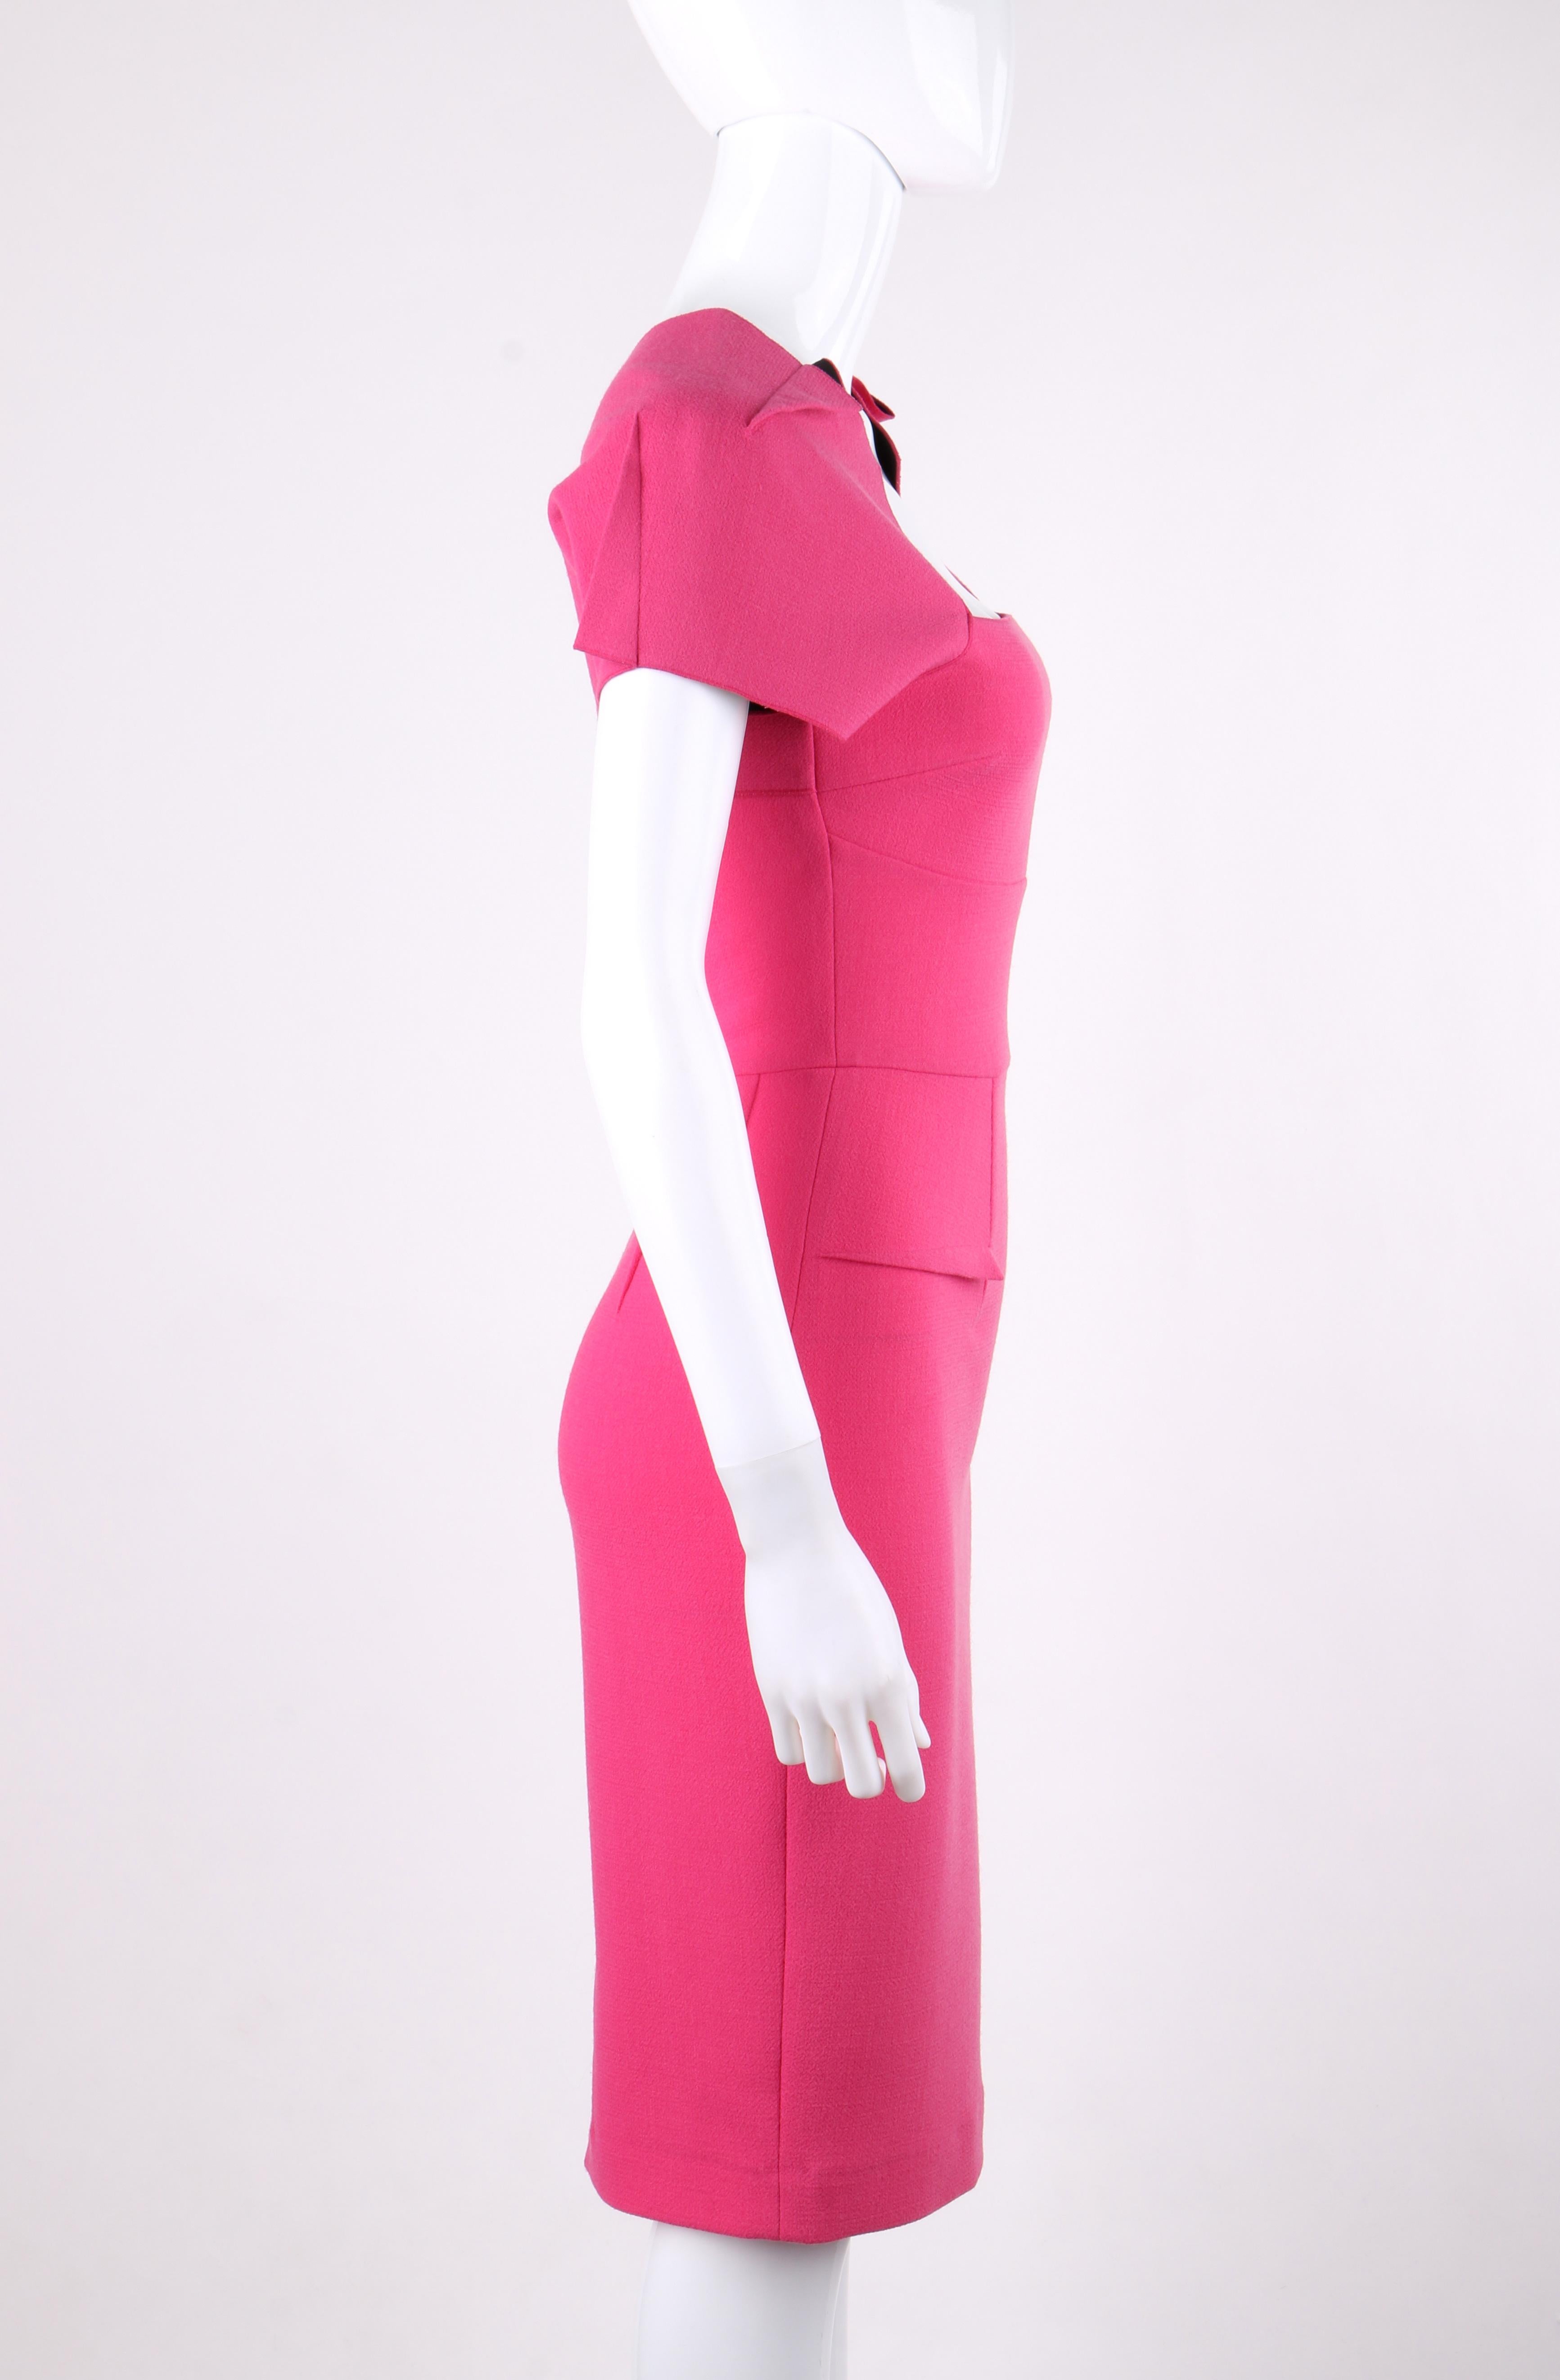 ROLAND MOURET Neiman Marcus Pink “Myrtha” Wool Crepe Fitted Sheath ...